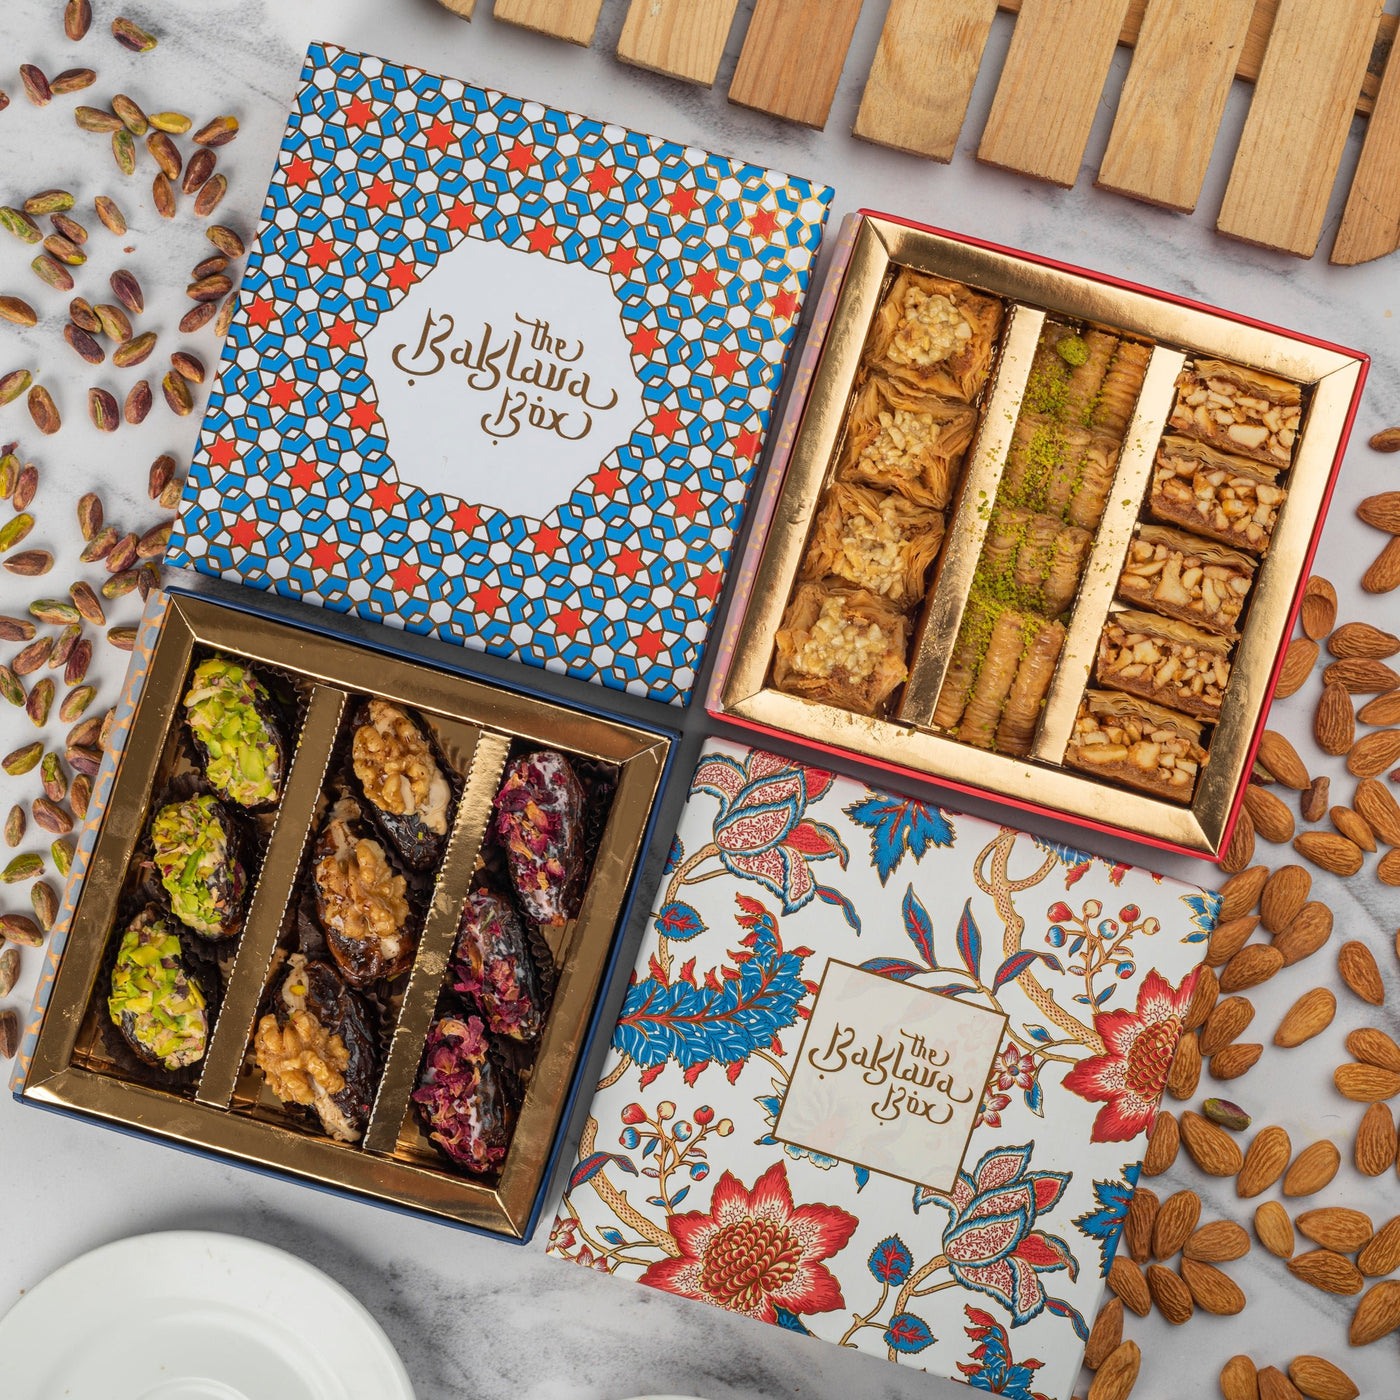 Best Selling Combos - THE BAKLAVA BOX